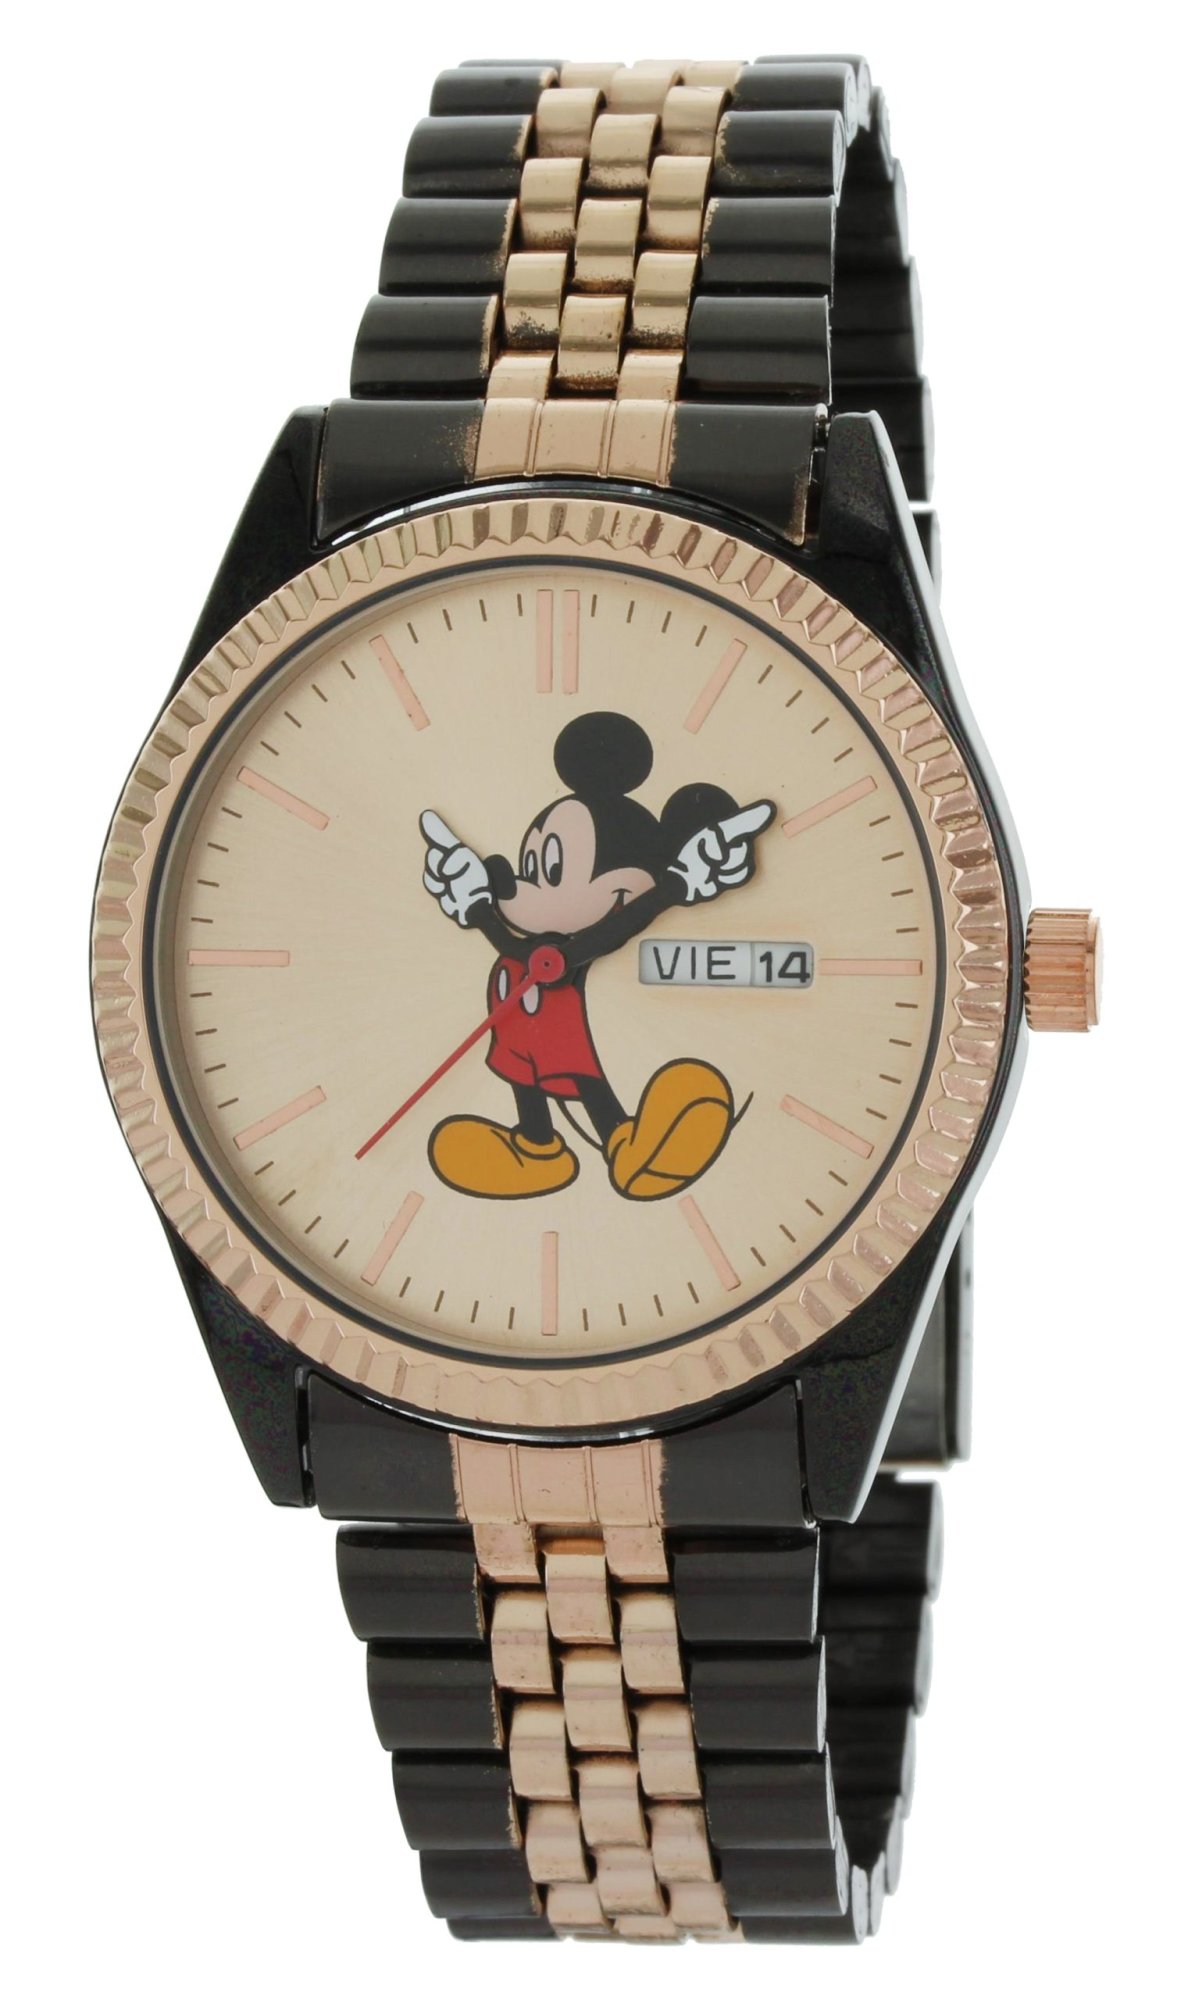 Model: Men's Mickey Mouse Watch in IP Black and Rose Gold with Day and Date